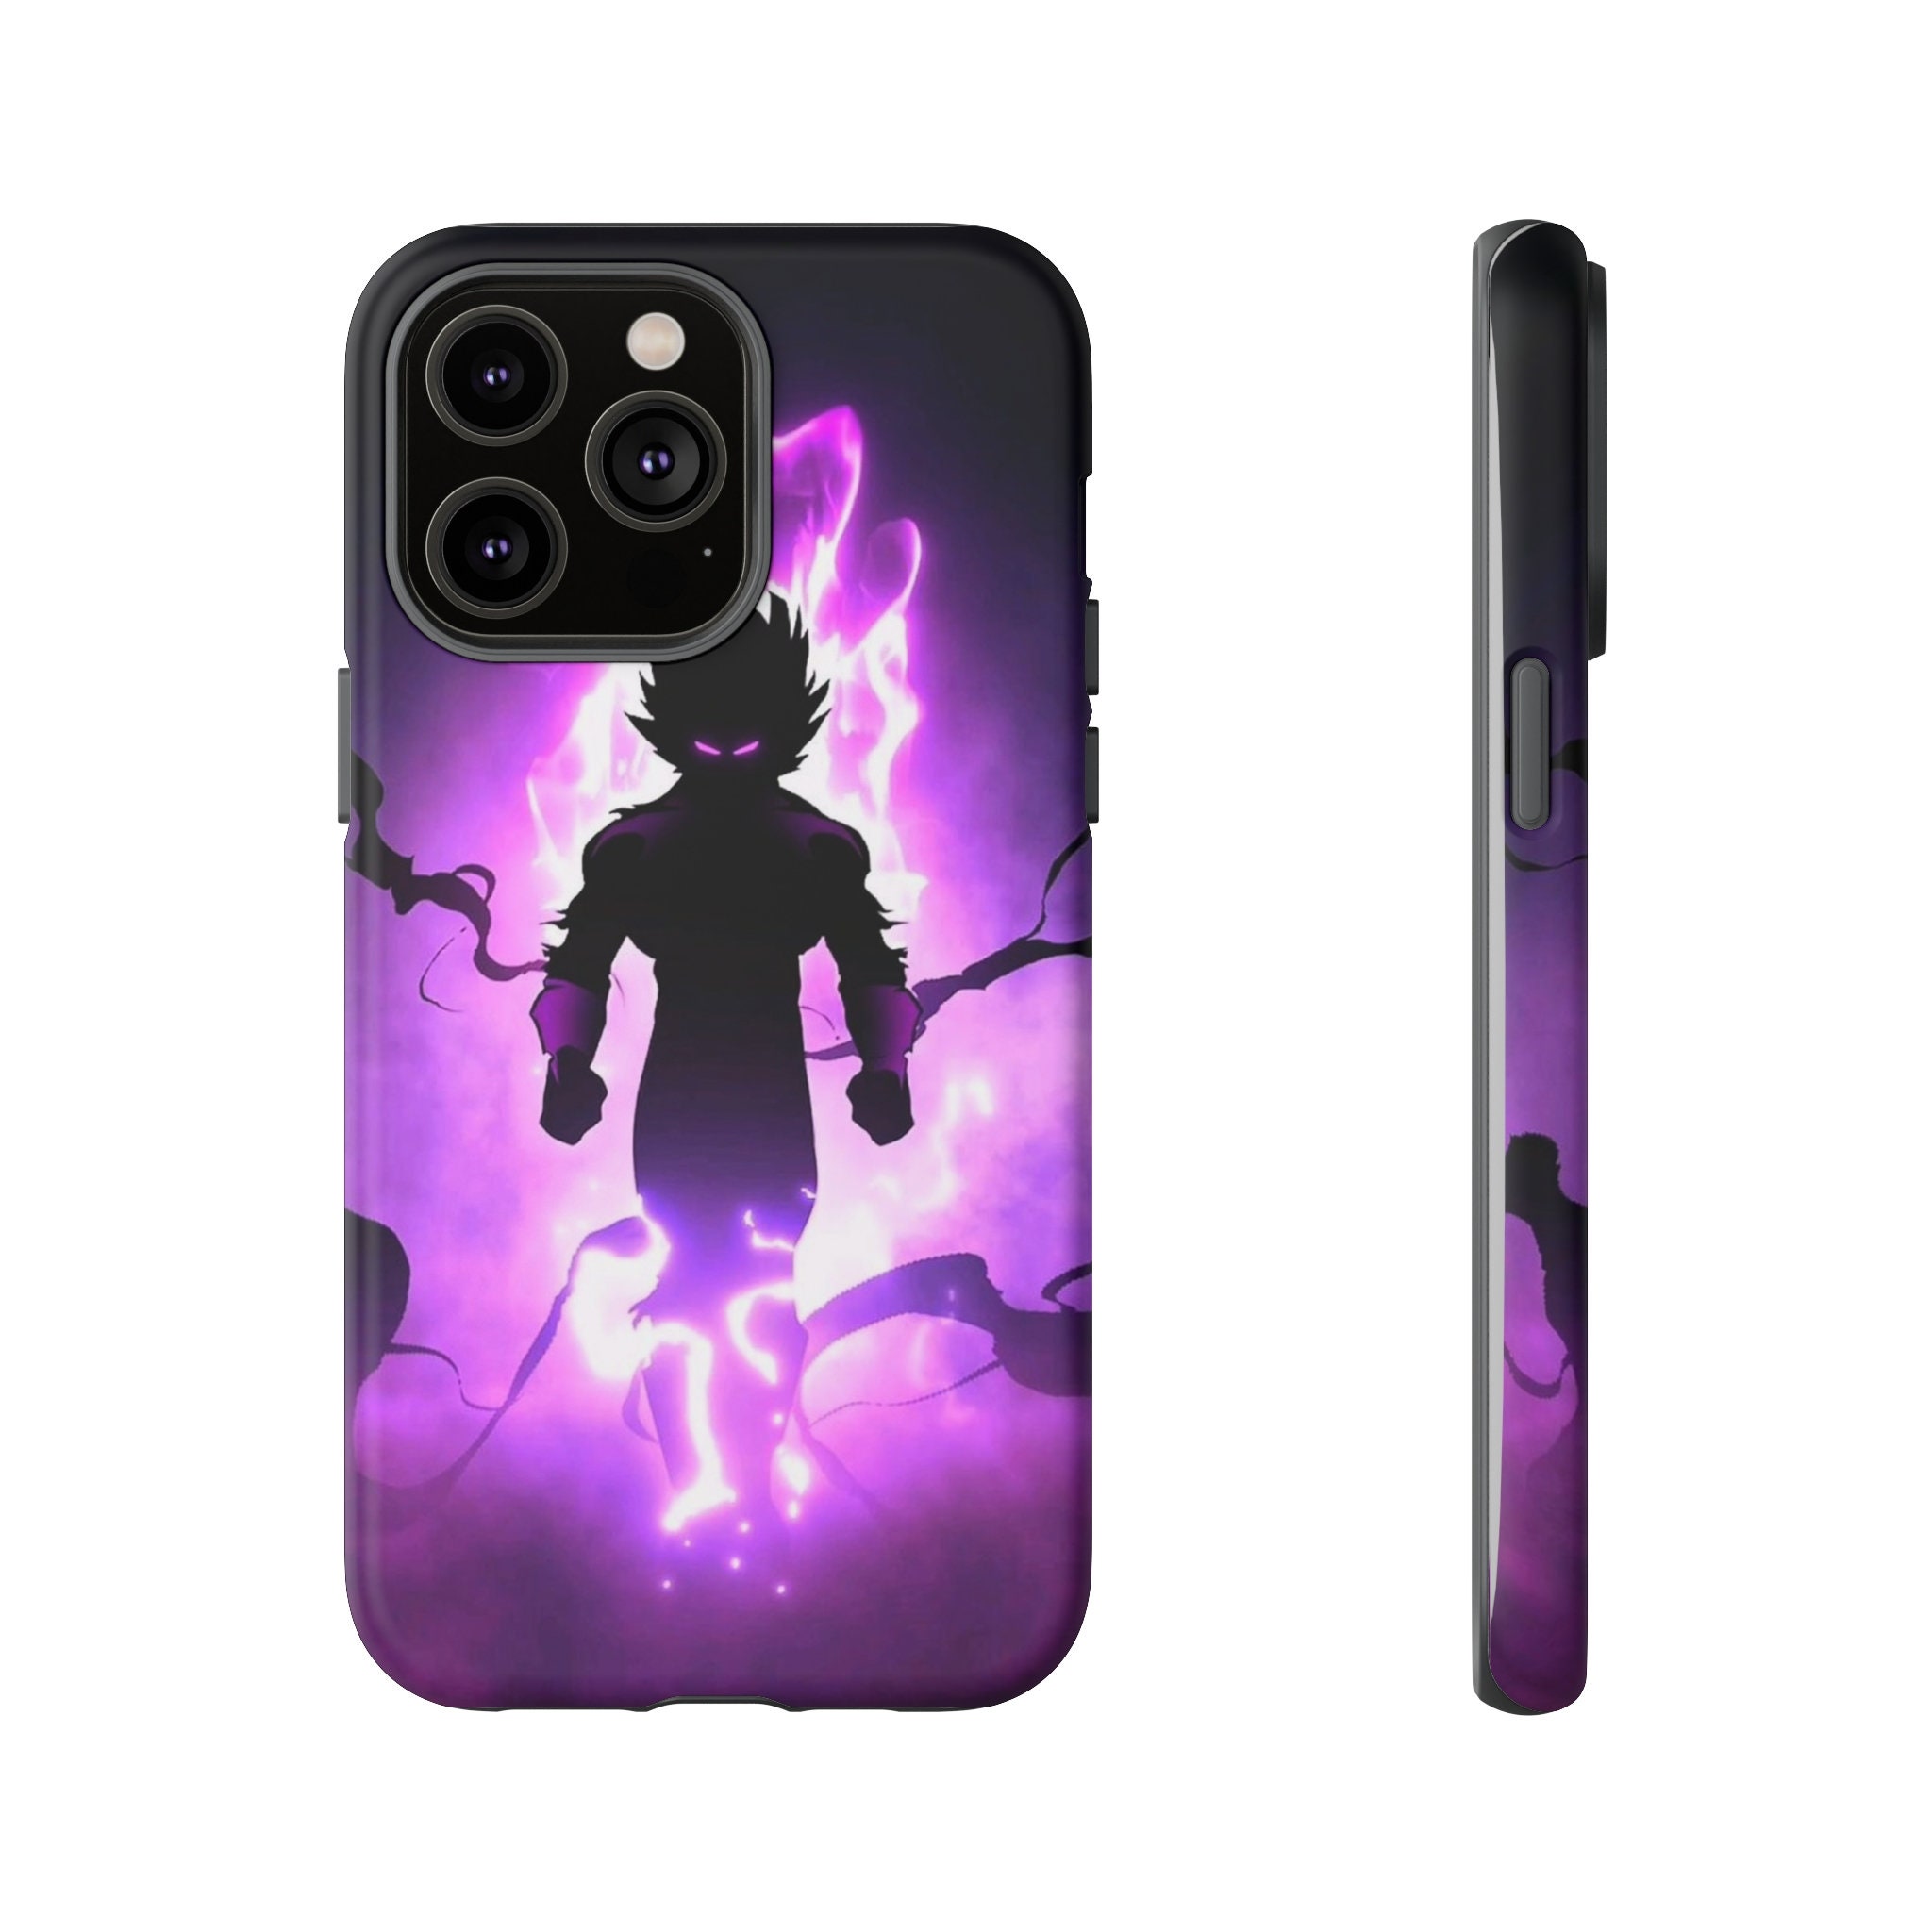 Future trunks ⚡️🔥 Get Dragon Ball Phone Cases !! Link in bio